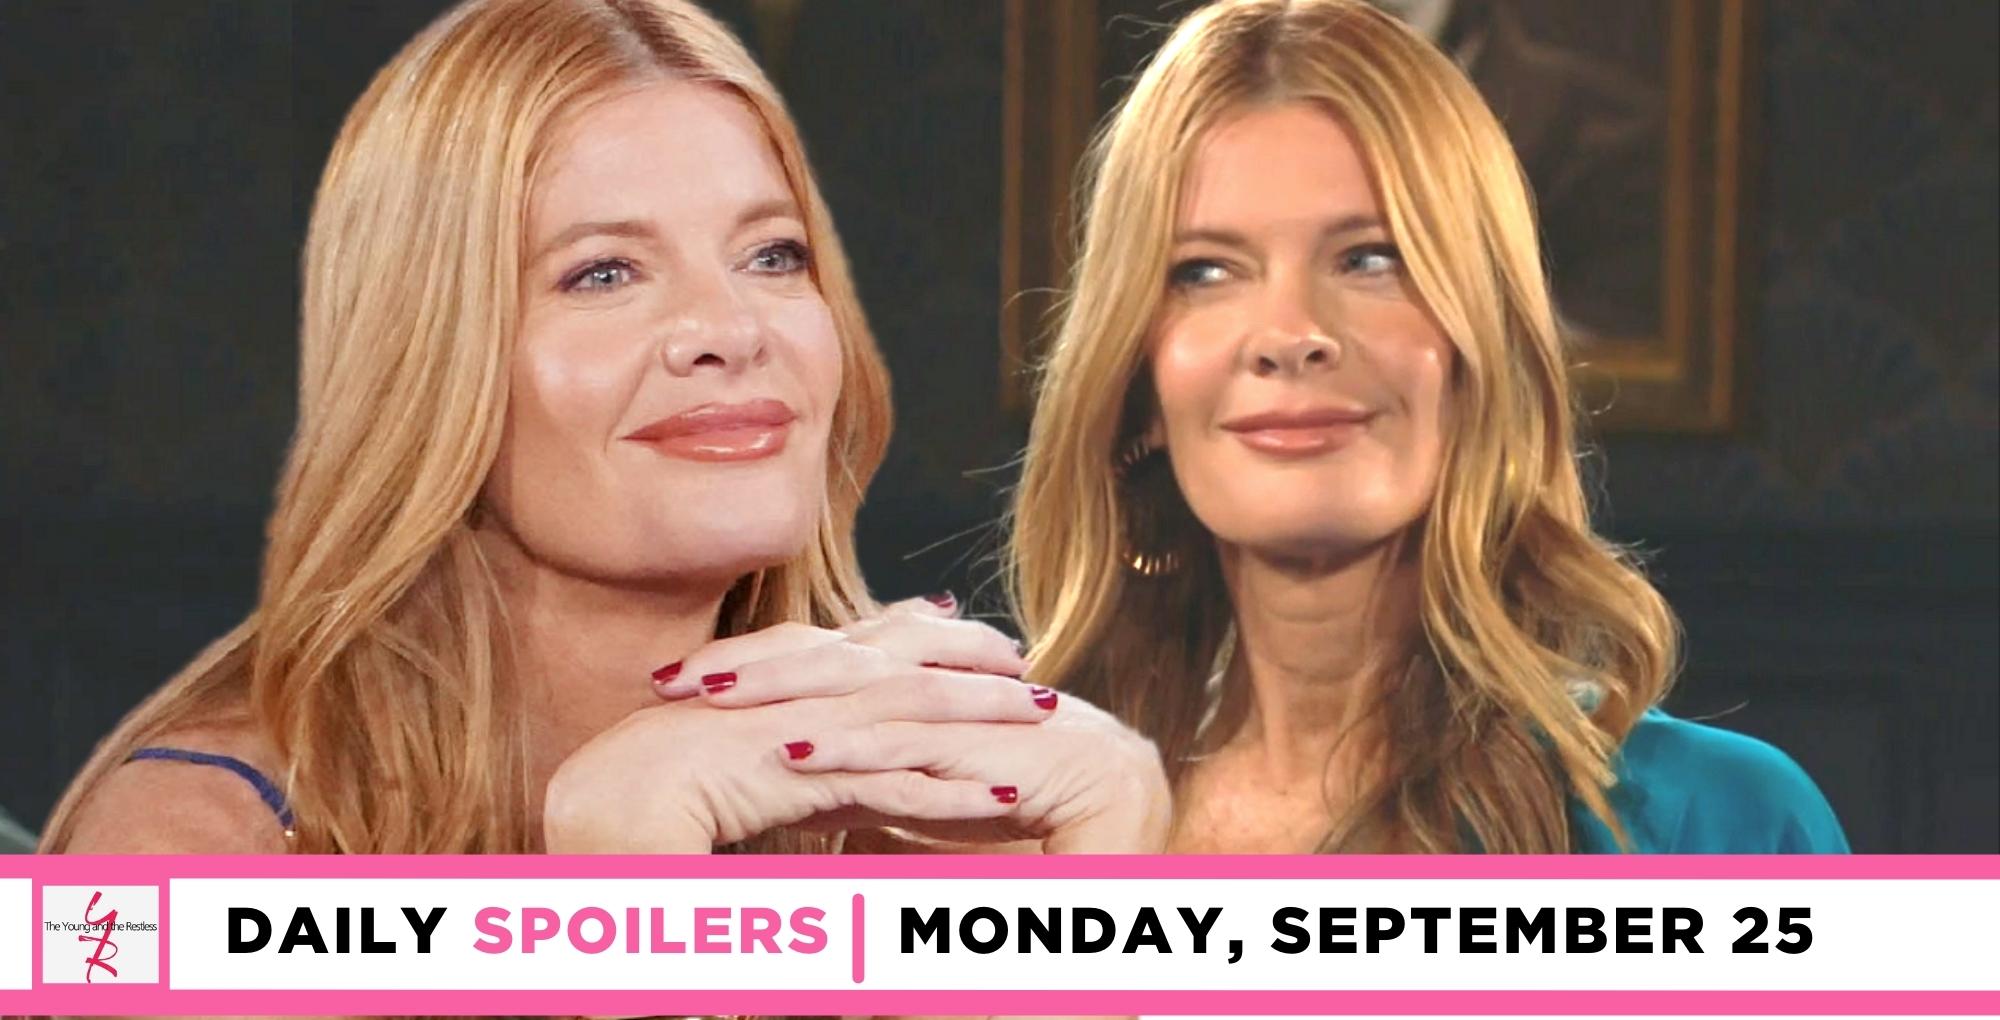 the young and the restless spoilers for september 25, 2023, show phyllis summers back to her old ways.